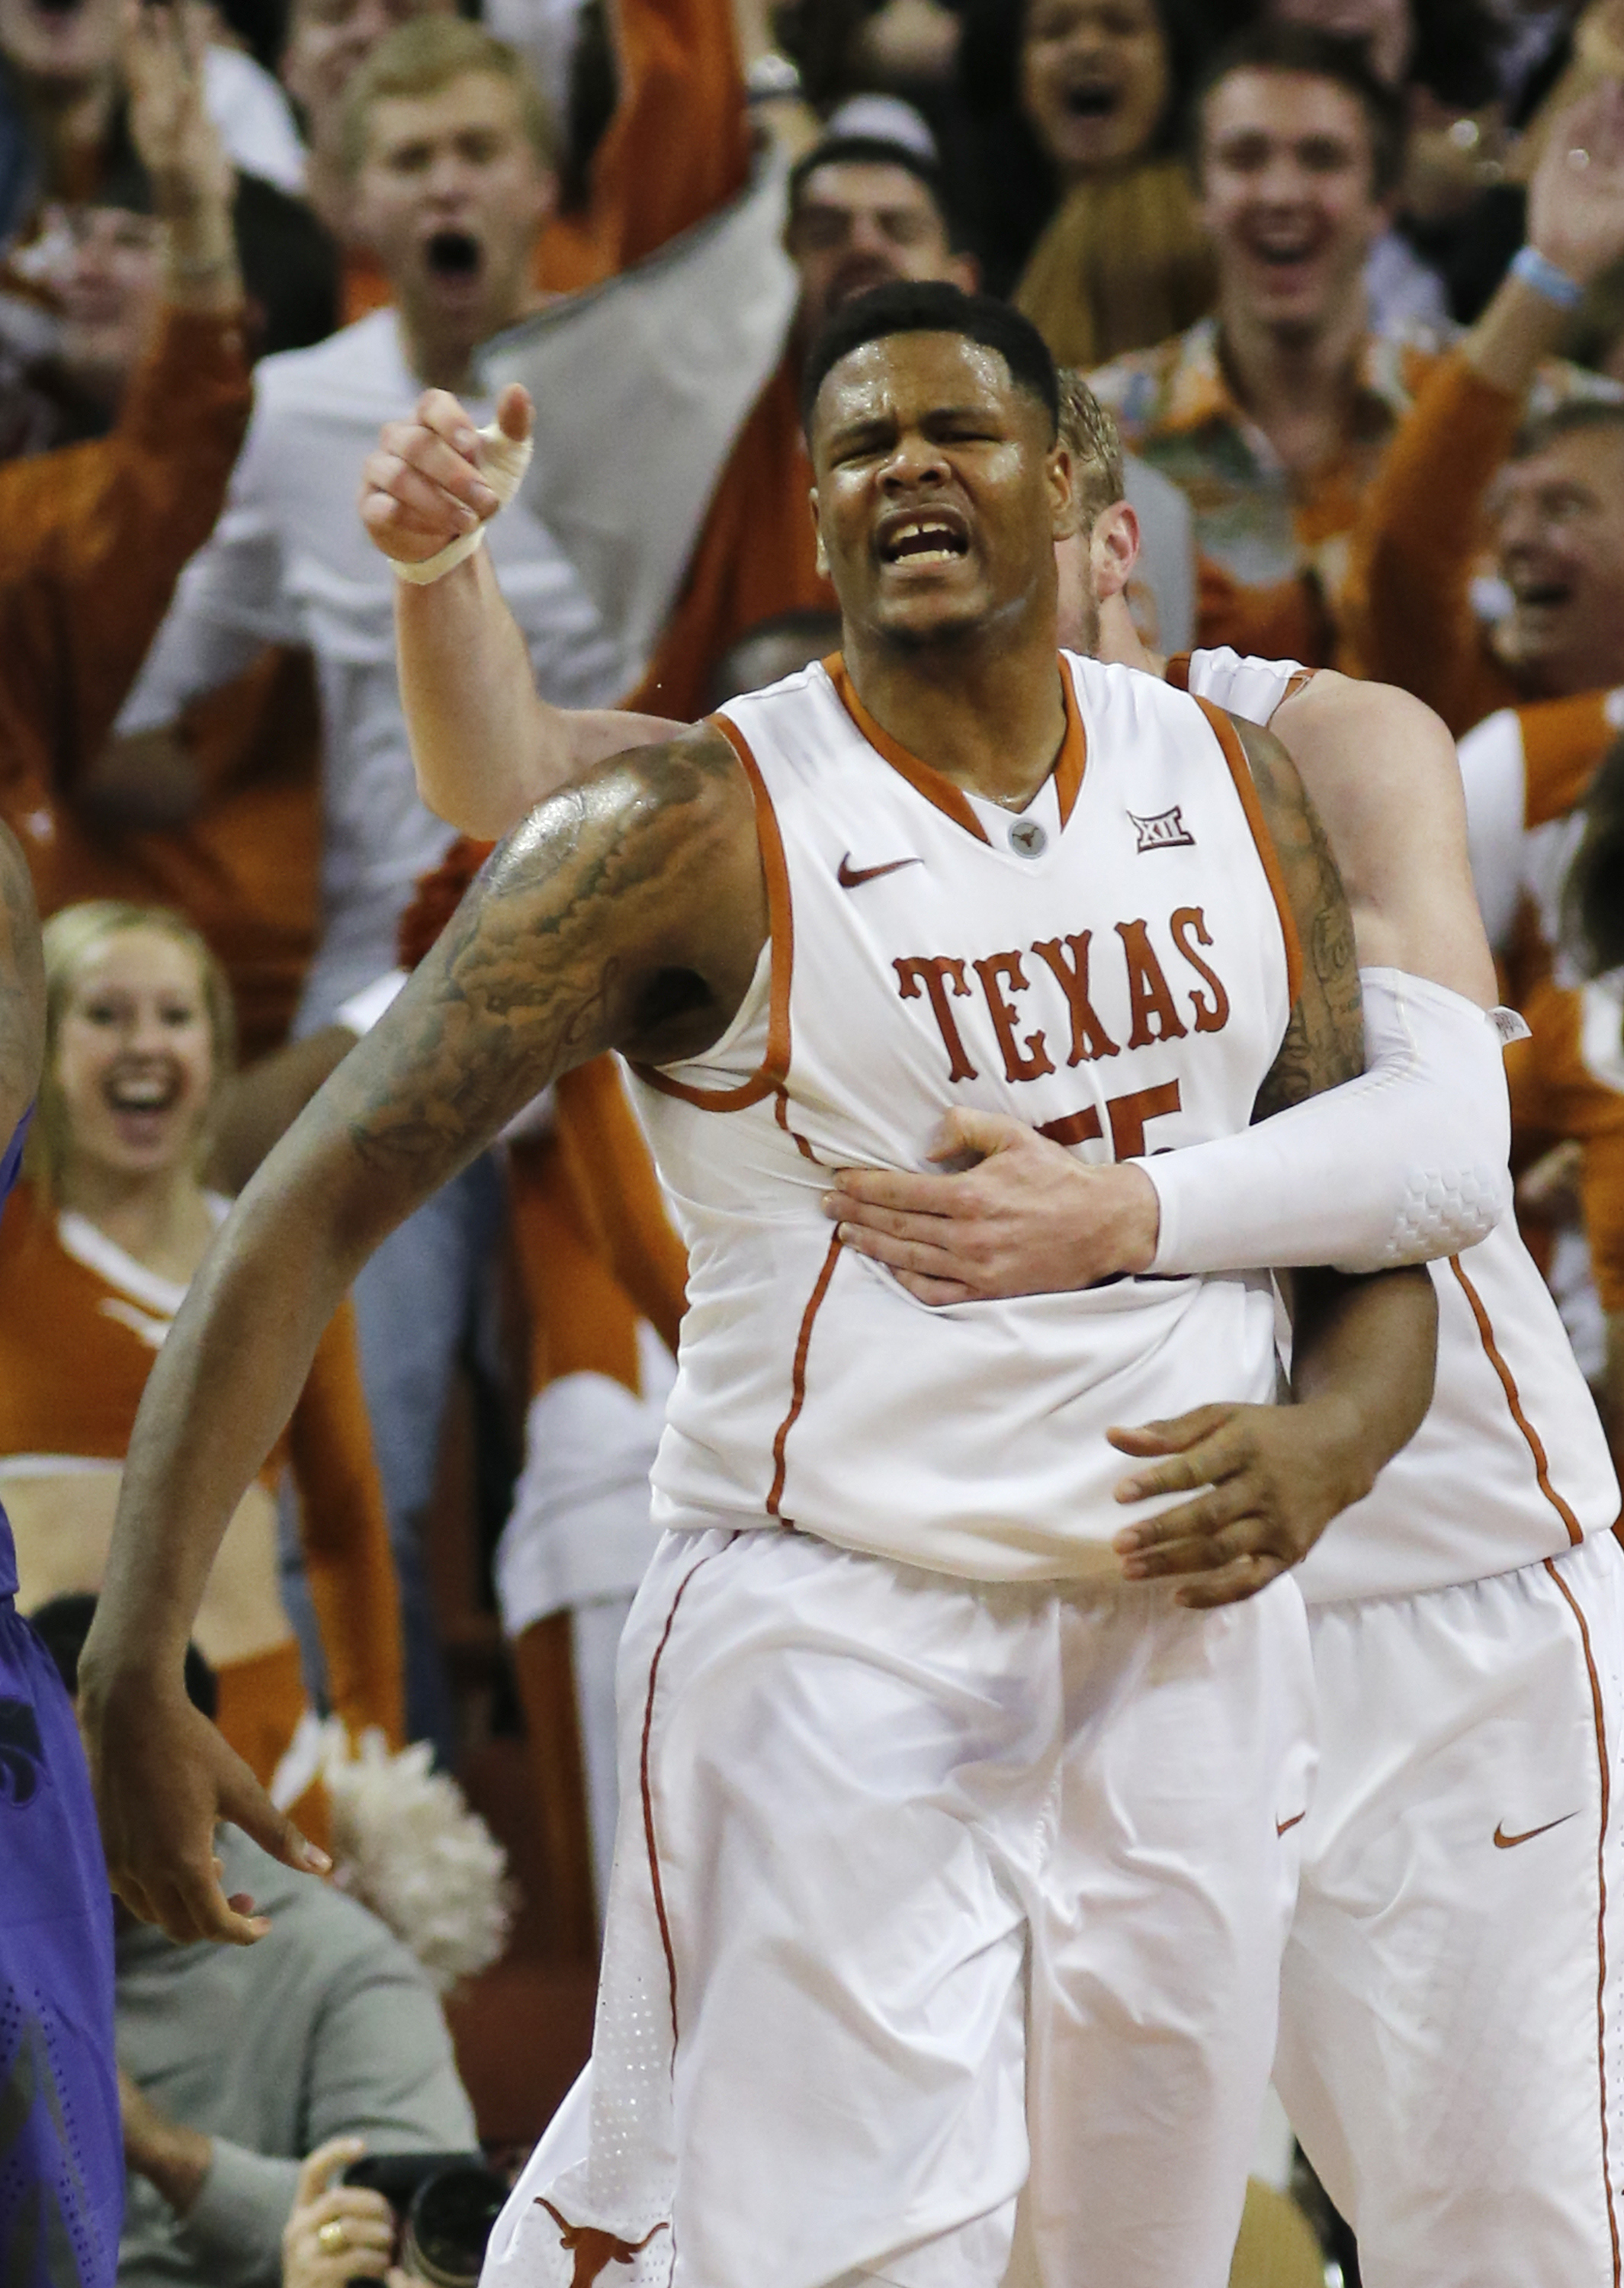 Cameron Ridley #55 of the Texas Longhorns reacts after a slam dunk on March 2, 2015. (Photo by Chris Covatta/Getty Images)